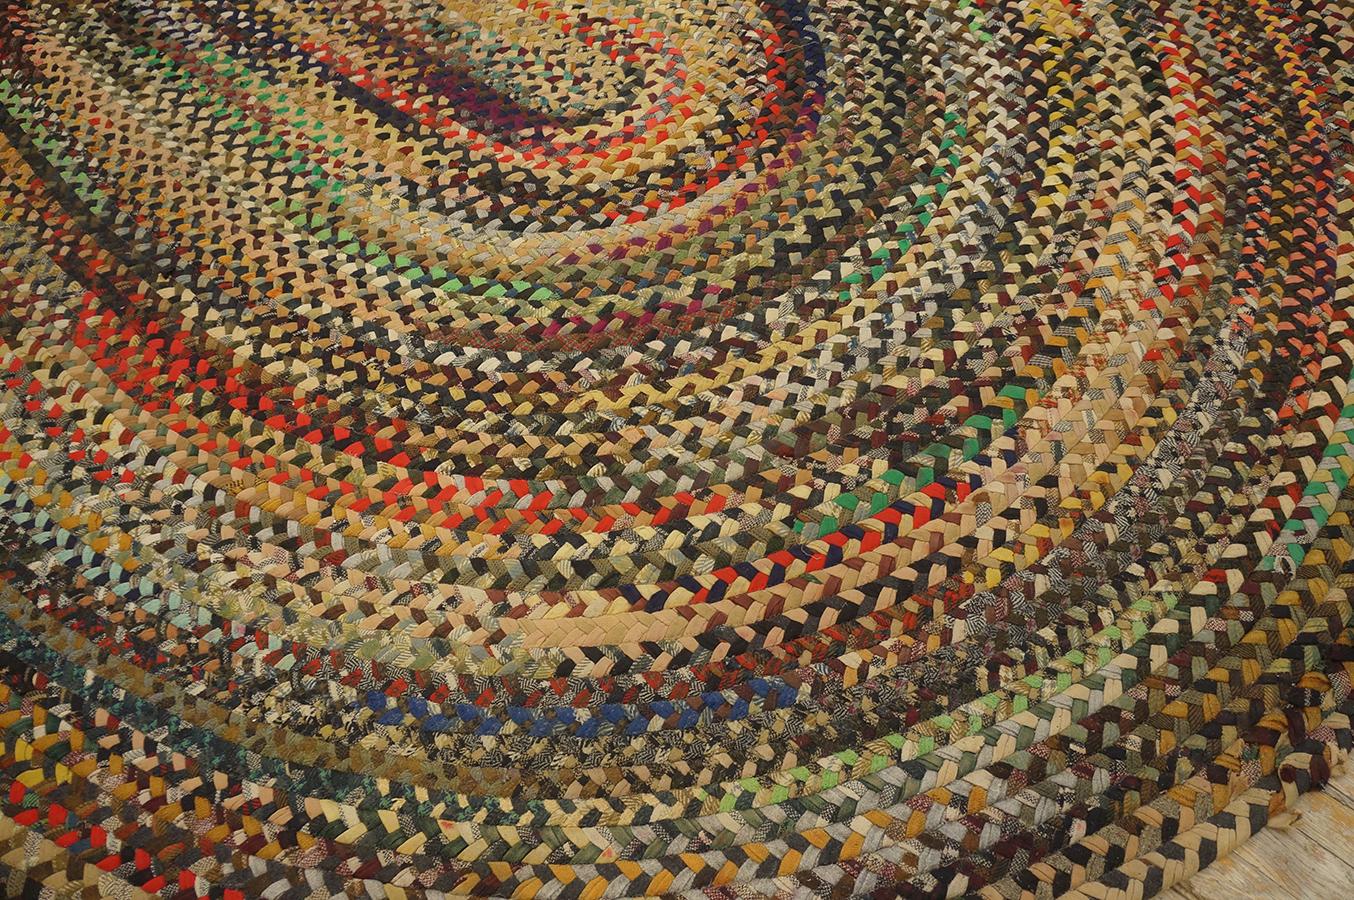 Hand-Woven 1940s American Braided Rug ( 9' x 11' 6